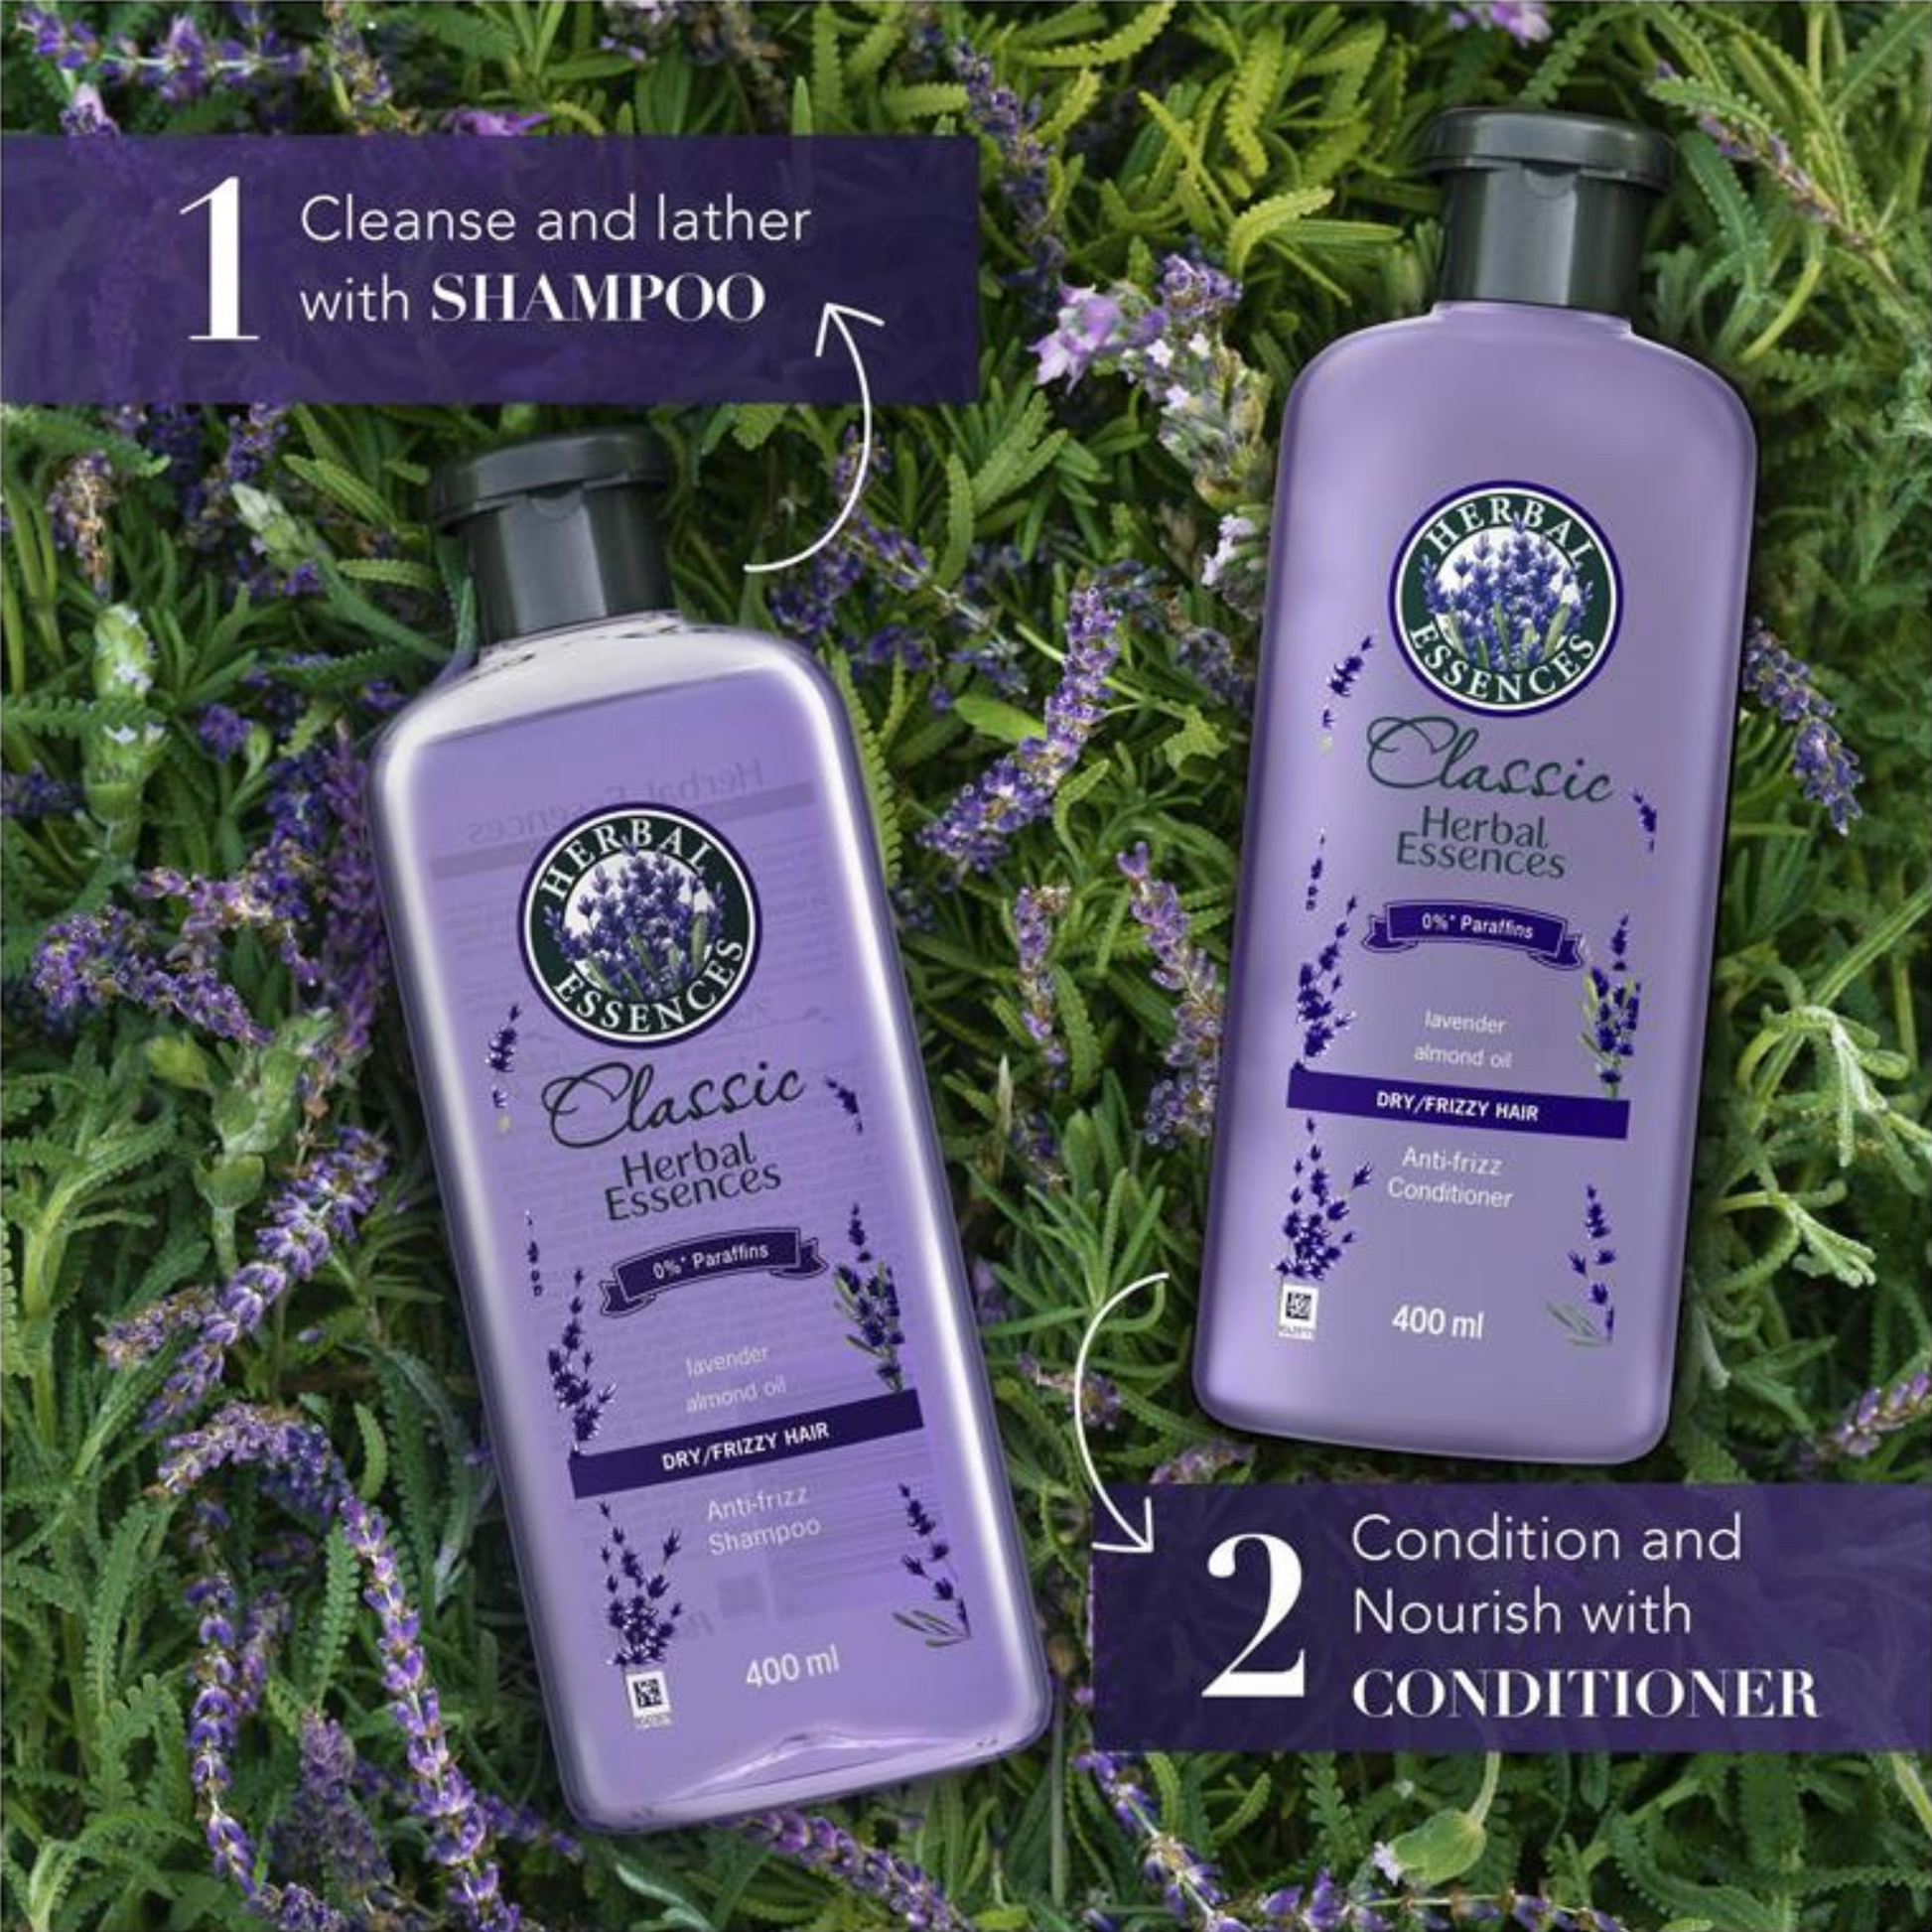 Herbal Essences Classic Lavender is a conditioner with scents inspired by nature for your dry & damaged hair. It controls frizz & leaves your hair straight & silky. Best foreign genuine authentic Australian Aussie imported real original premium haircare safe care fall healthy cheap price in Dhaka Chittagong Bangladesh.